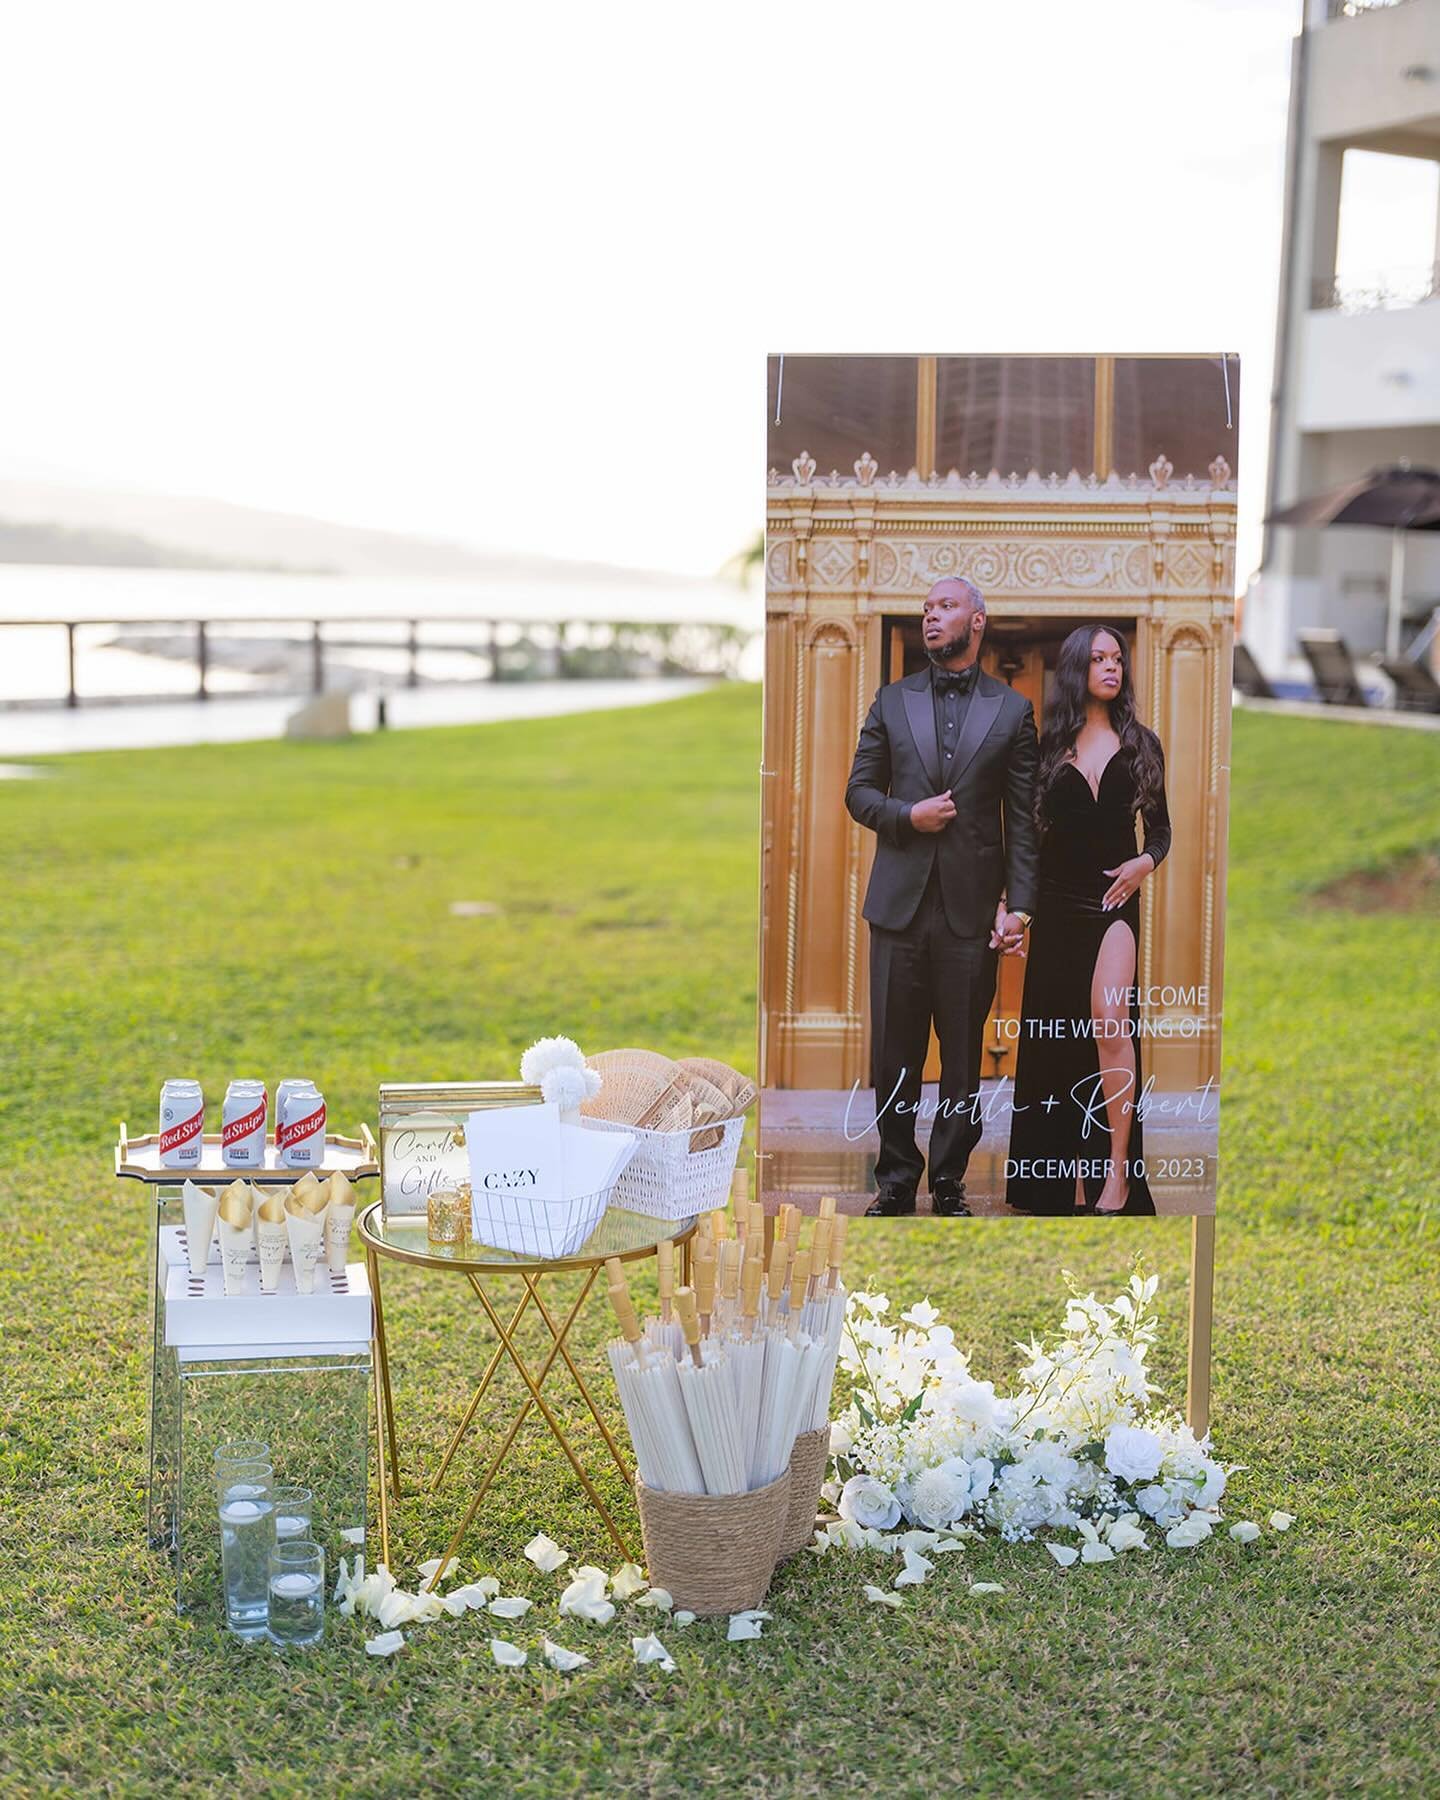 ✨✨The smaller details of your special day should reflect your personality and tell your story! 

✨️Wedding Planner/Stylist 
@tropicalchiceventsja

📍 @breathlessmontegobay 

#cazyinlove #blacklove #weddingdetail #memorialplaque #tropicalchicwedding #